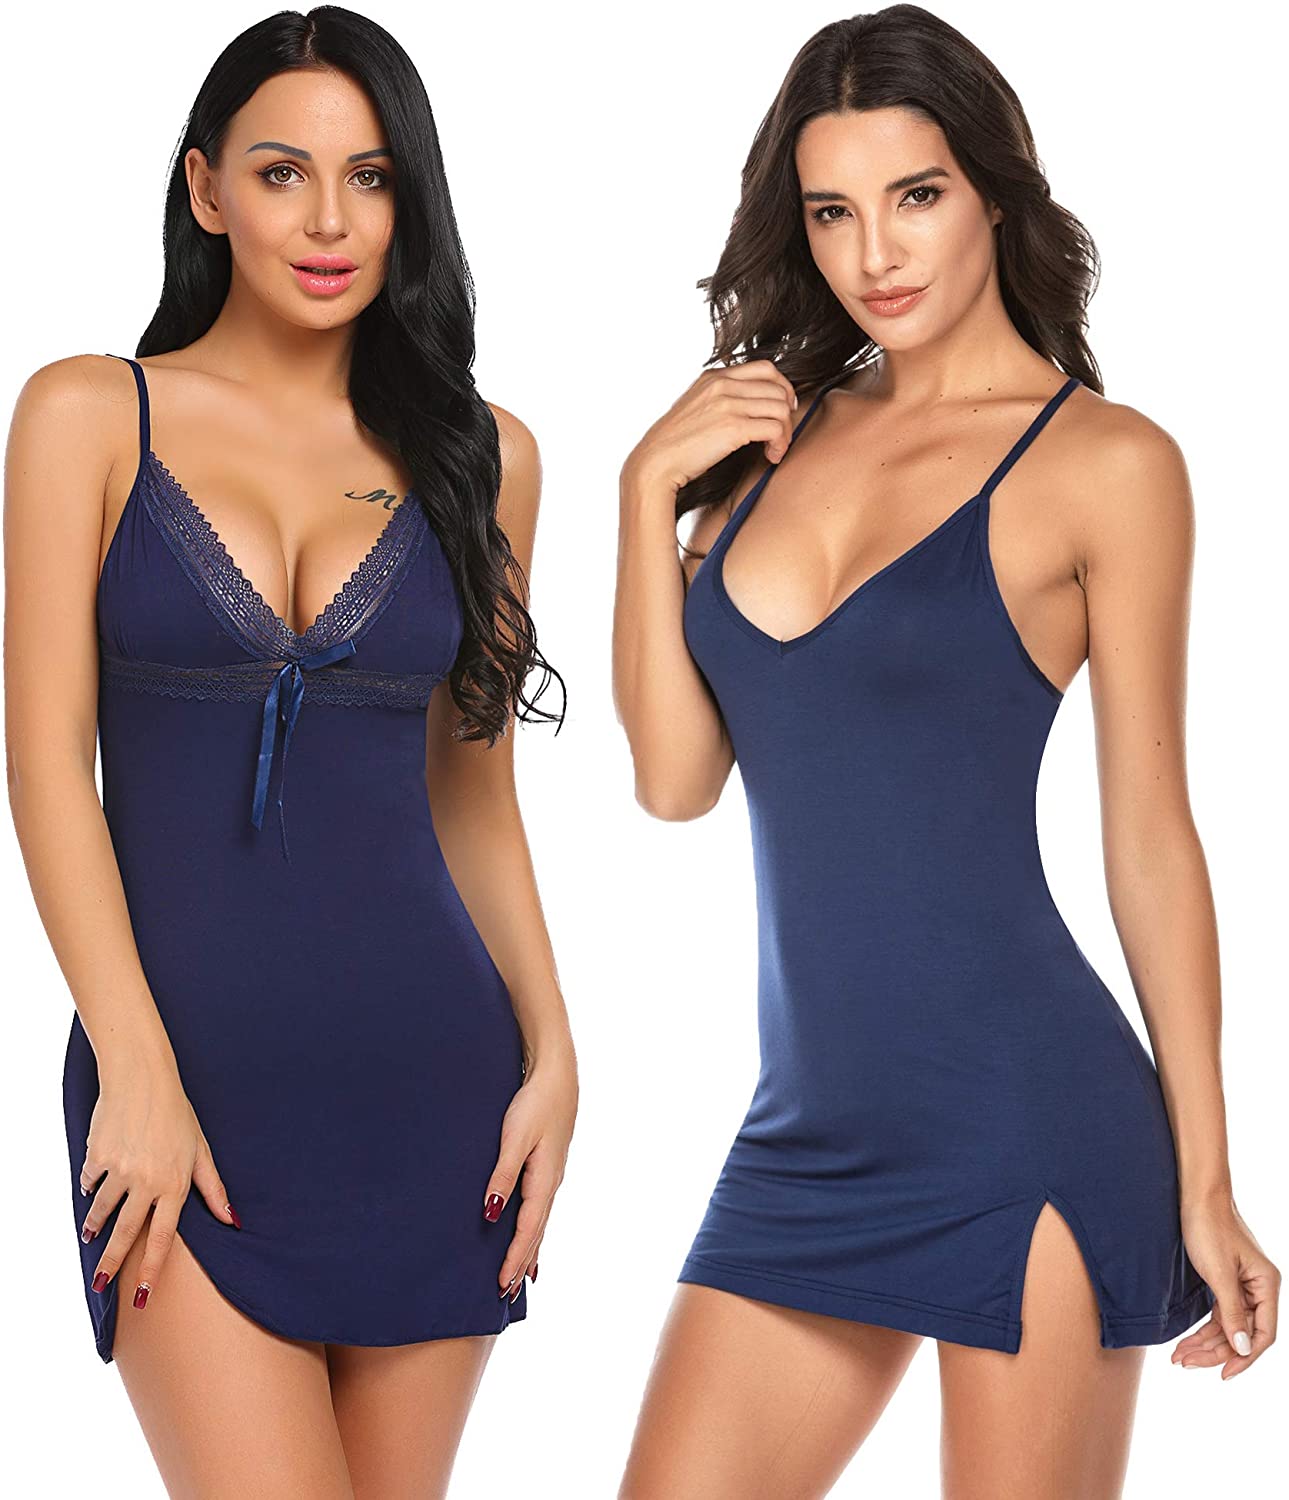 Price:$30.99 ADOME Cotton Sleepwear Women V Neck Chemise Nightgown Lace Lingerie Full Slip Dress at Amazon Women’s Clothing store